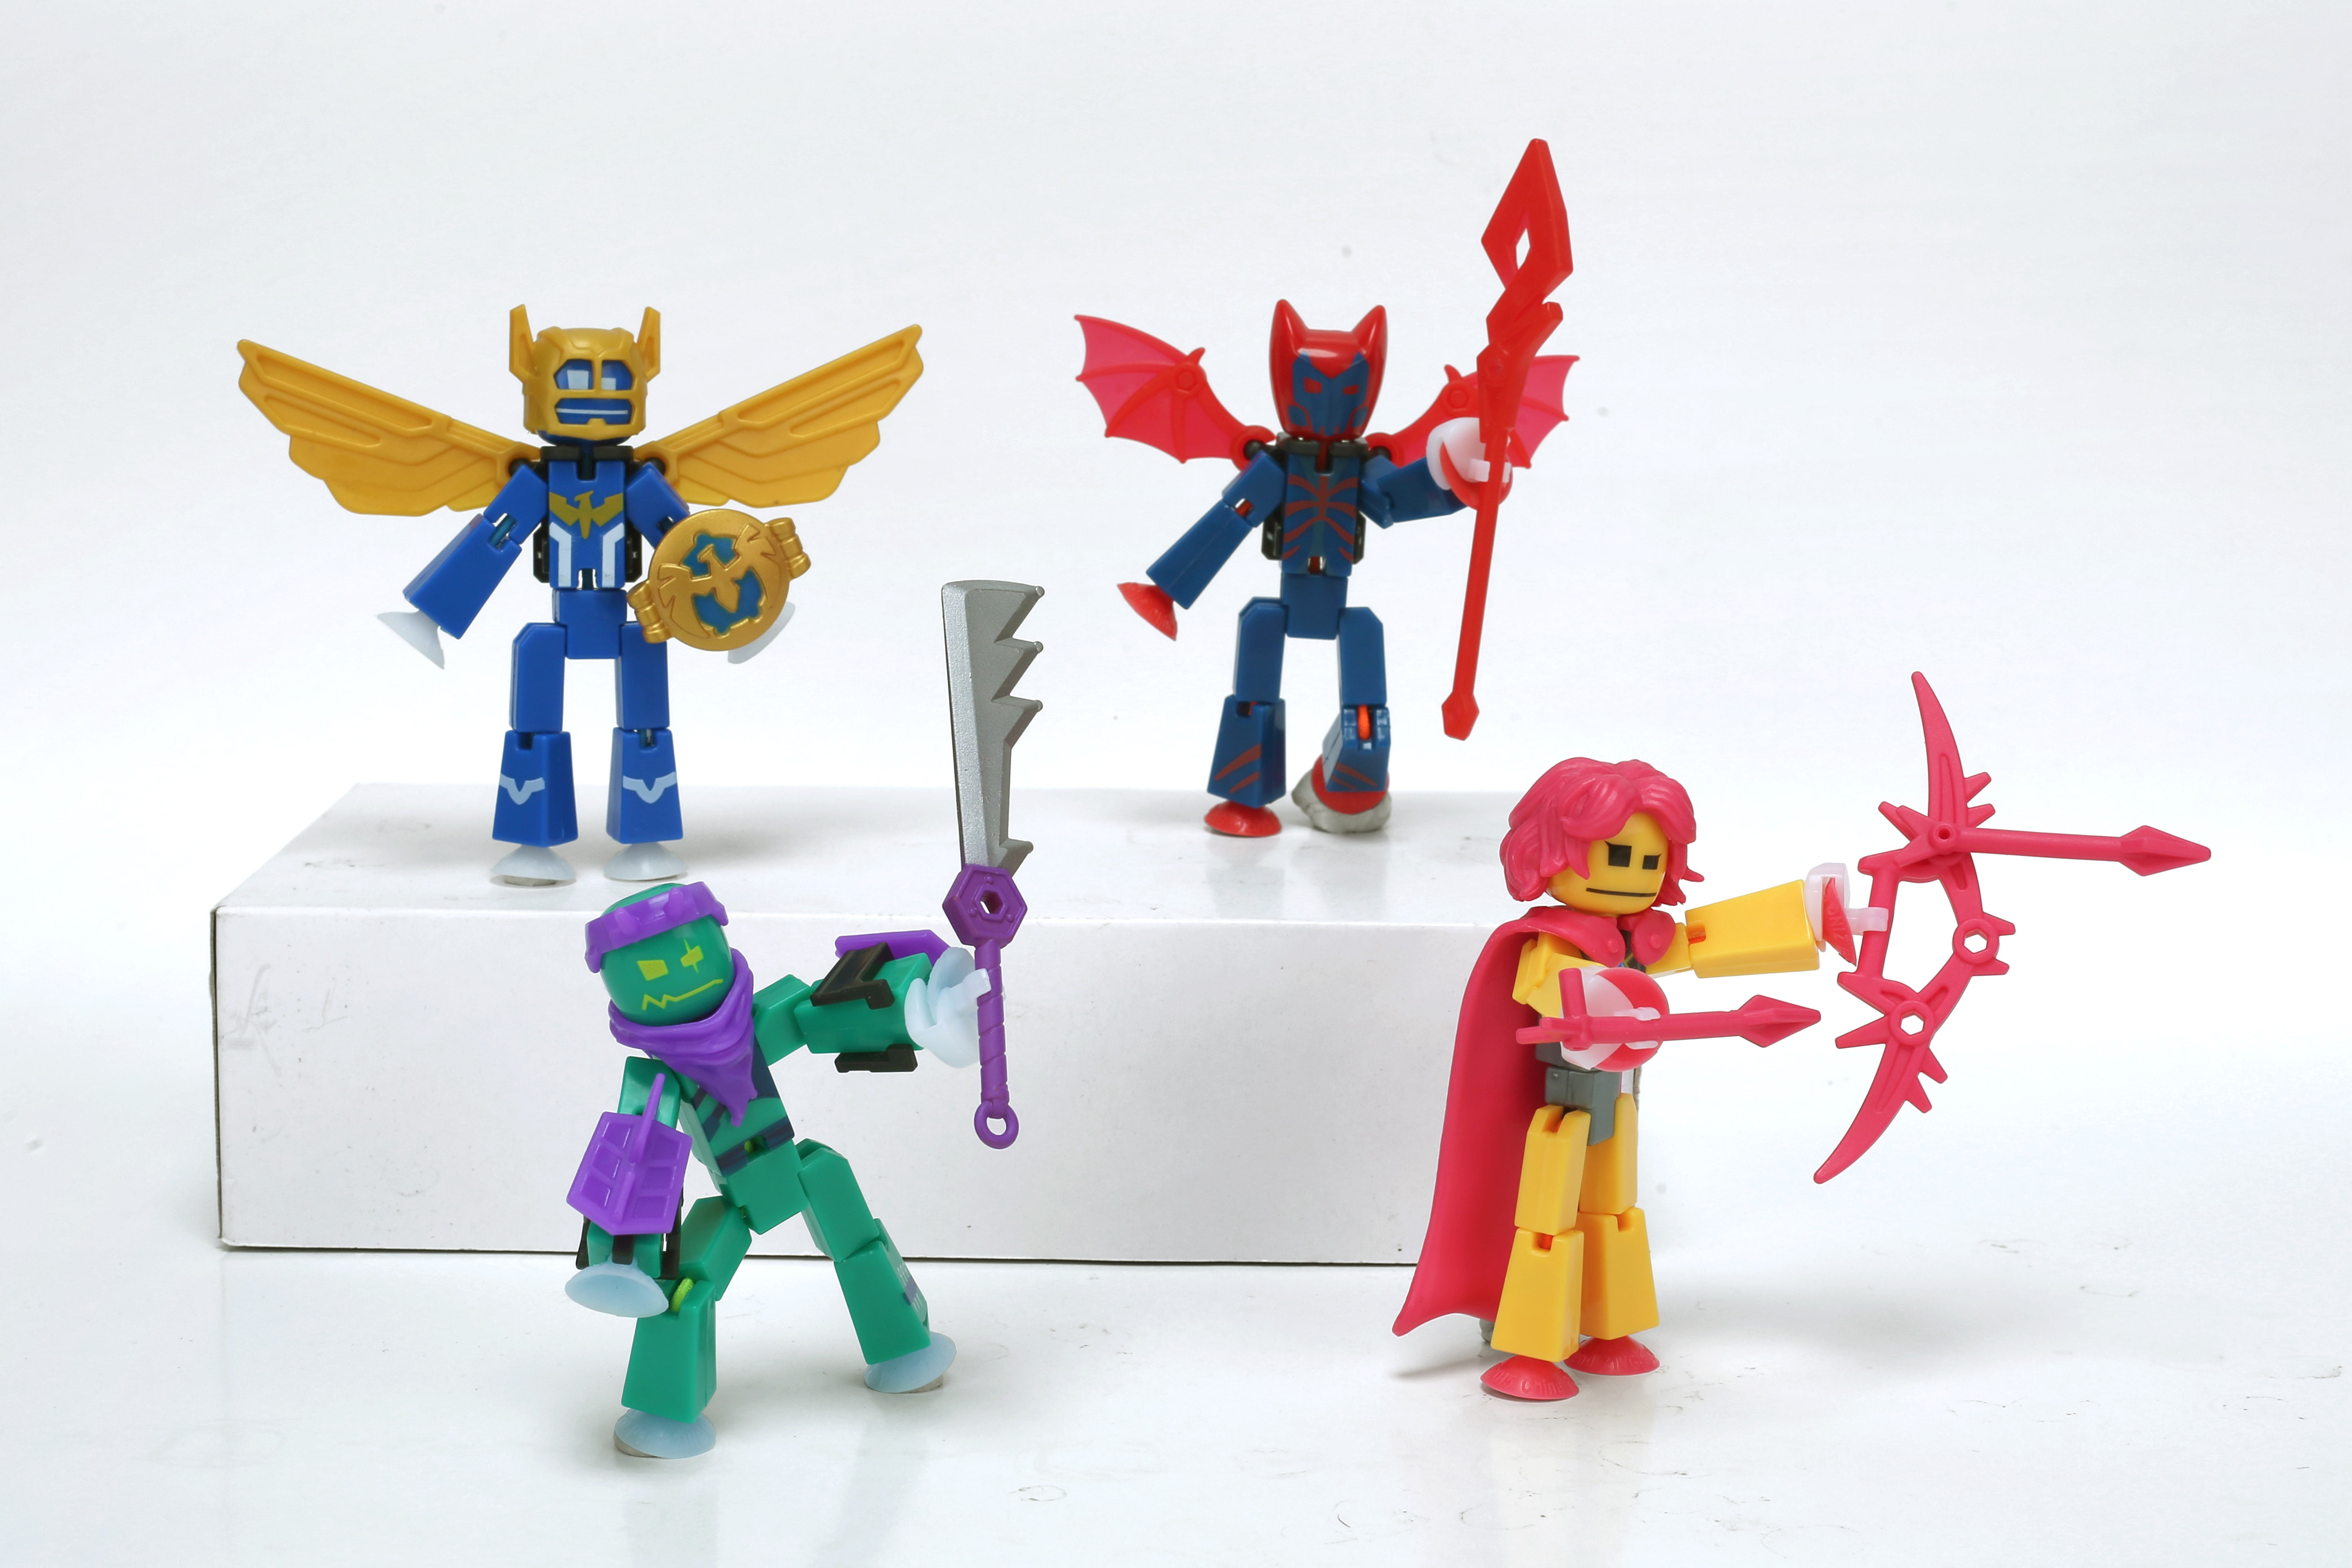  Zing StikBot Legendz Series 1 - Includes Valor, Ruebell, Dominus  and Raze Oni - Collectible Action Figures and Accessories, Stop Motion  Animation, Ages 4 and Up : Toys & Games